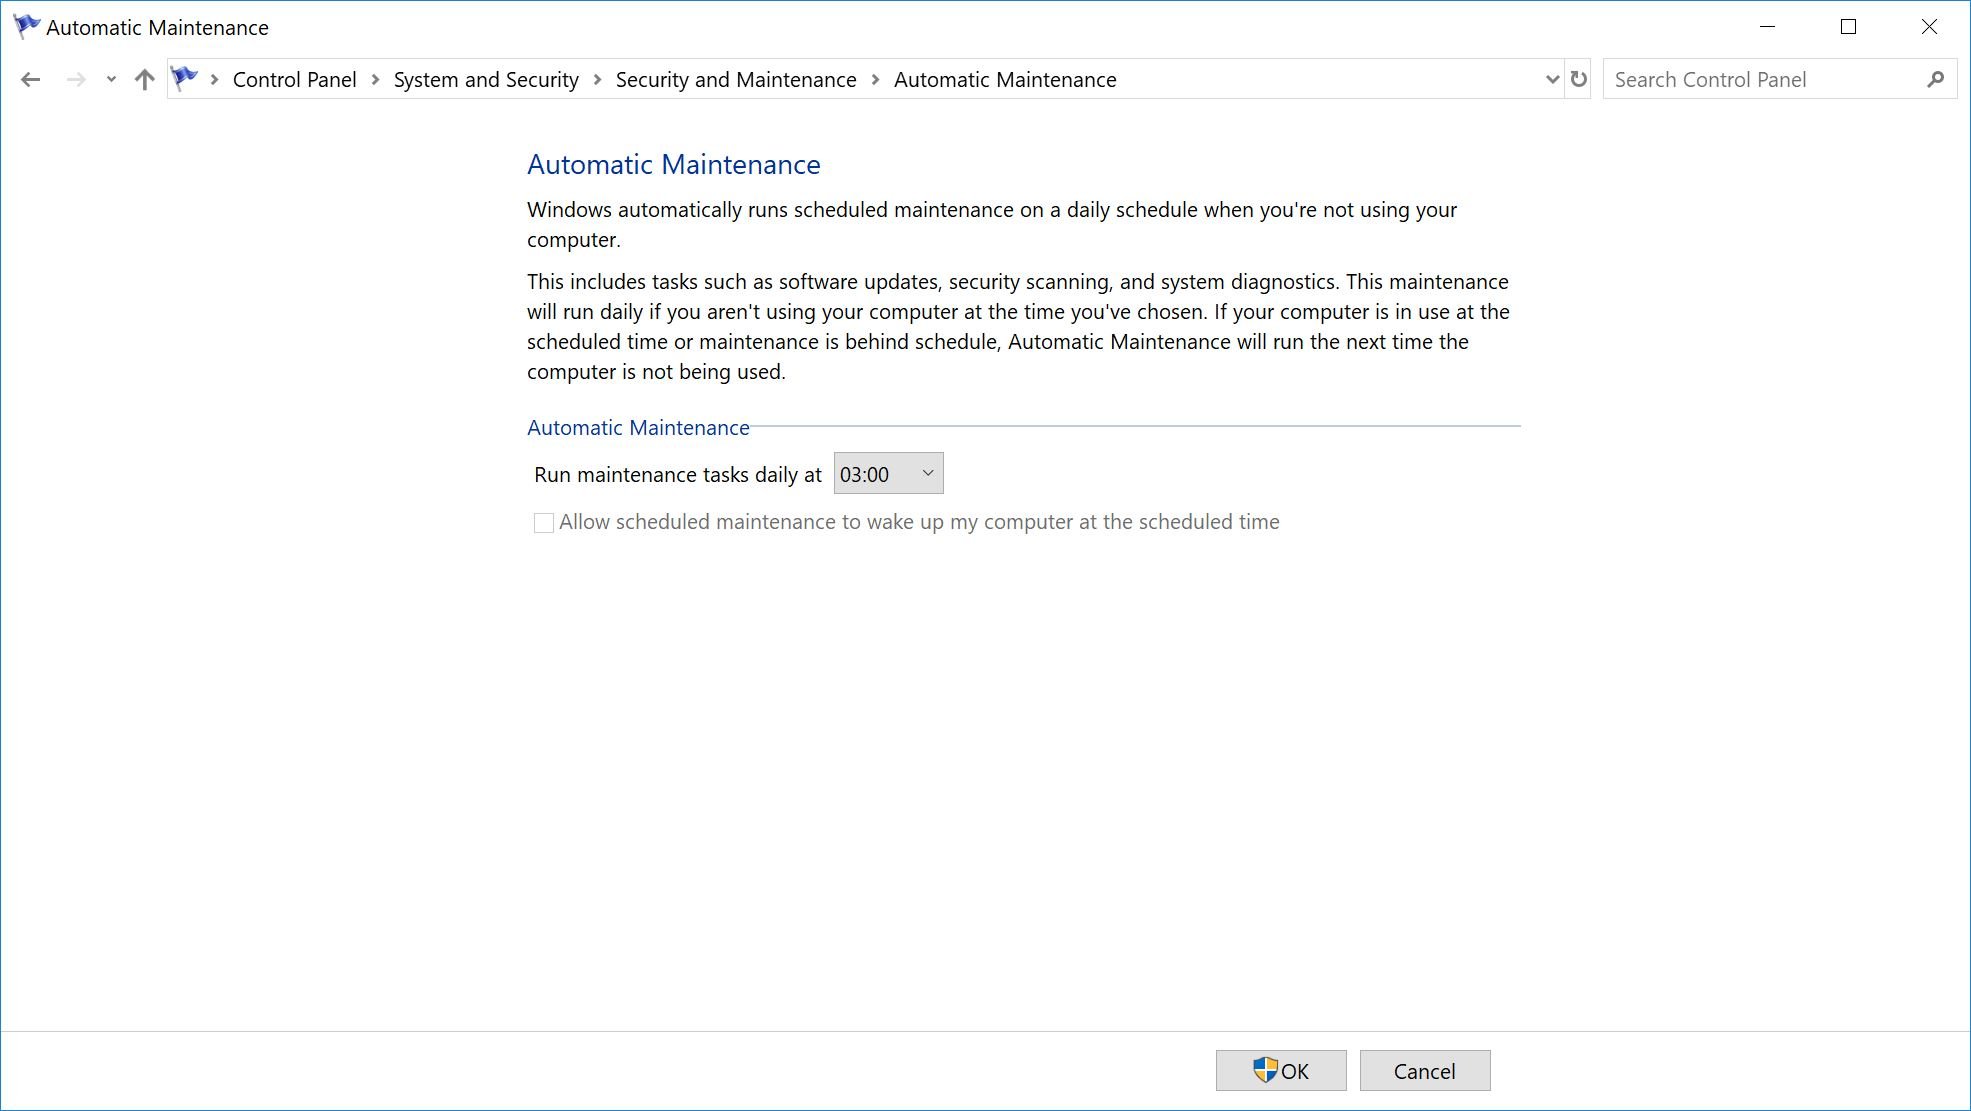 How to manage Windows 10’s automatic maintenance feature